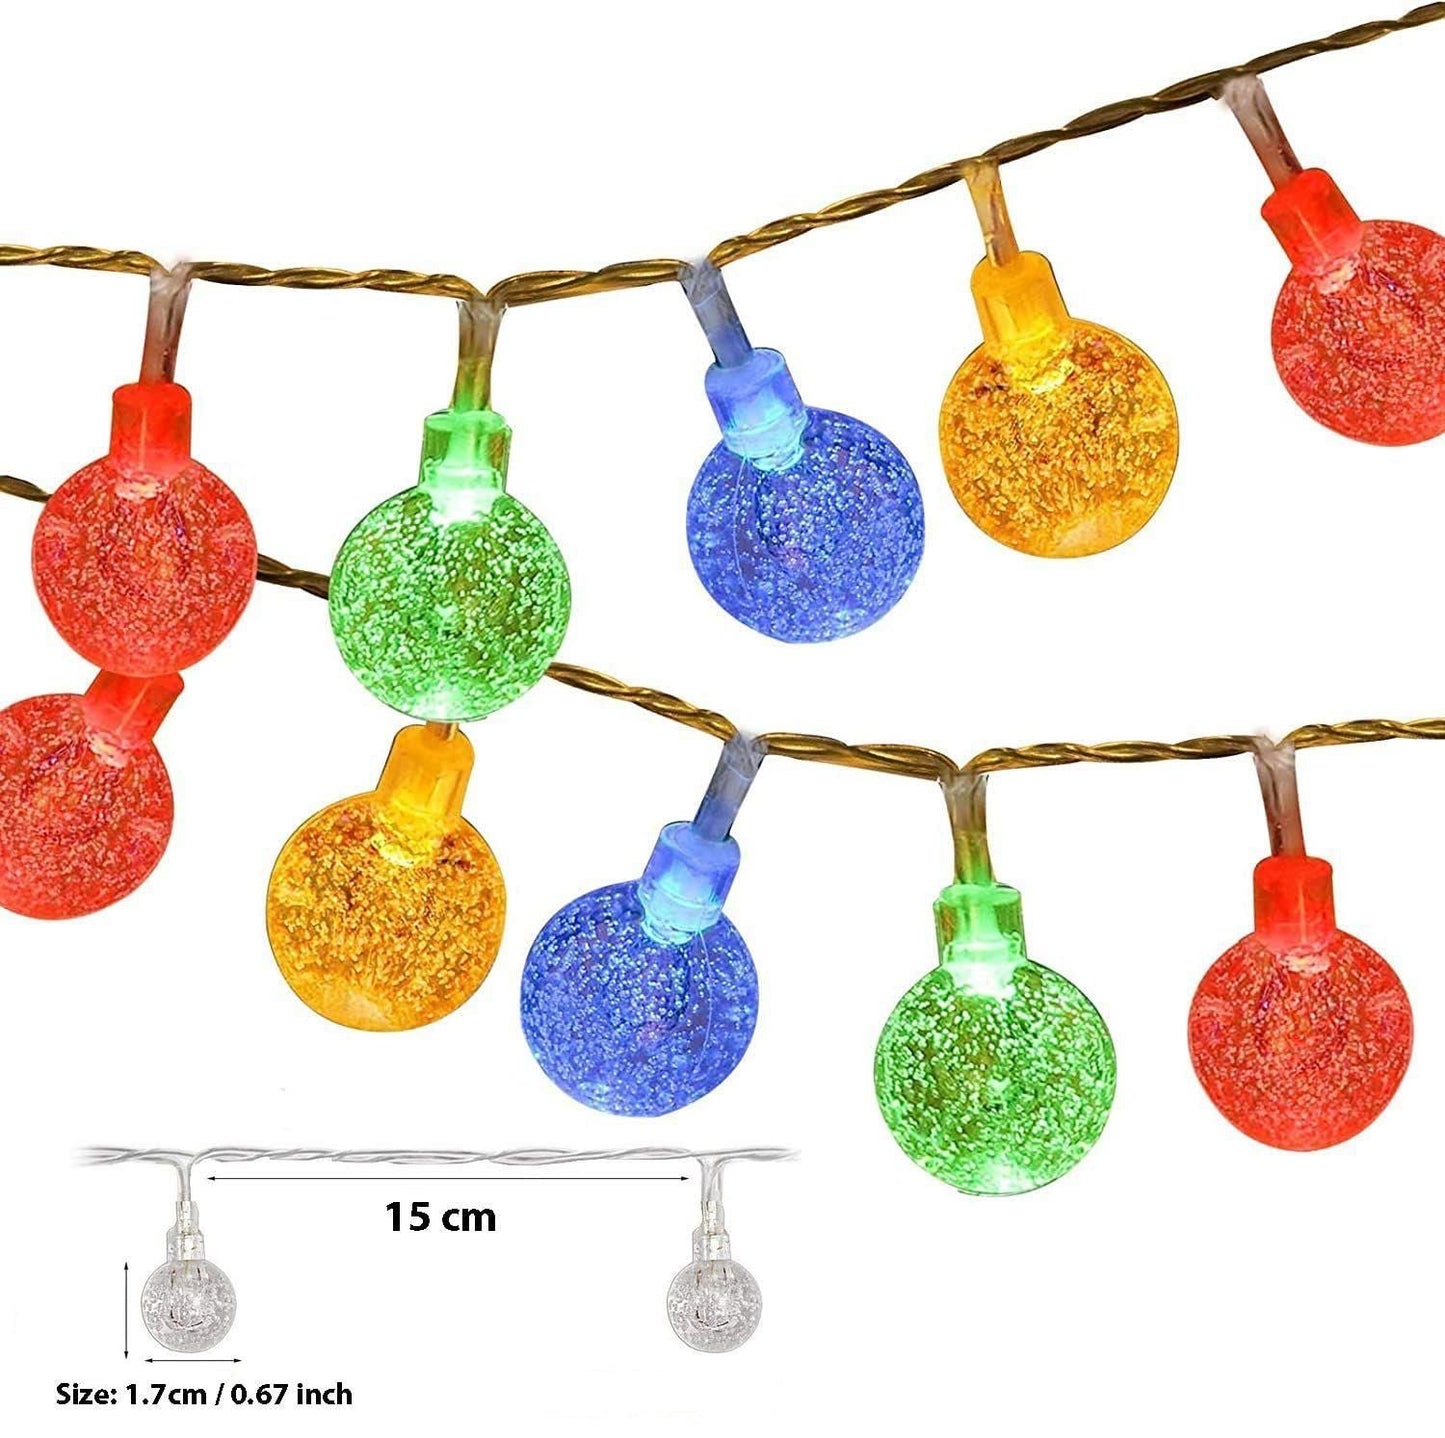 14 LED Crystal Bubble Ball String Fairy Lights For Decoration (Multicolor) Roposo Clout